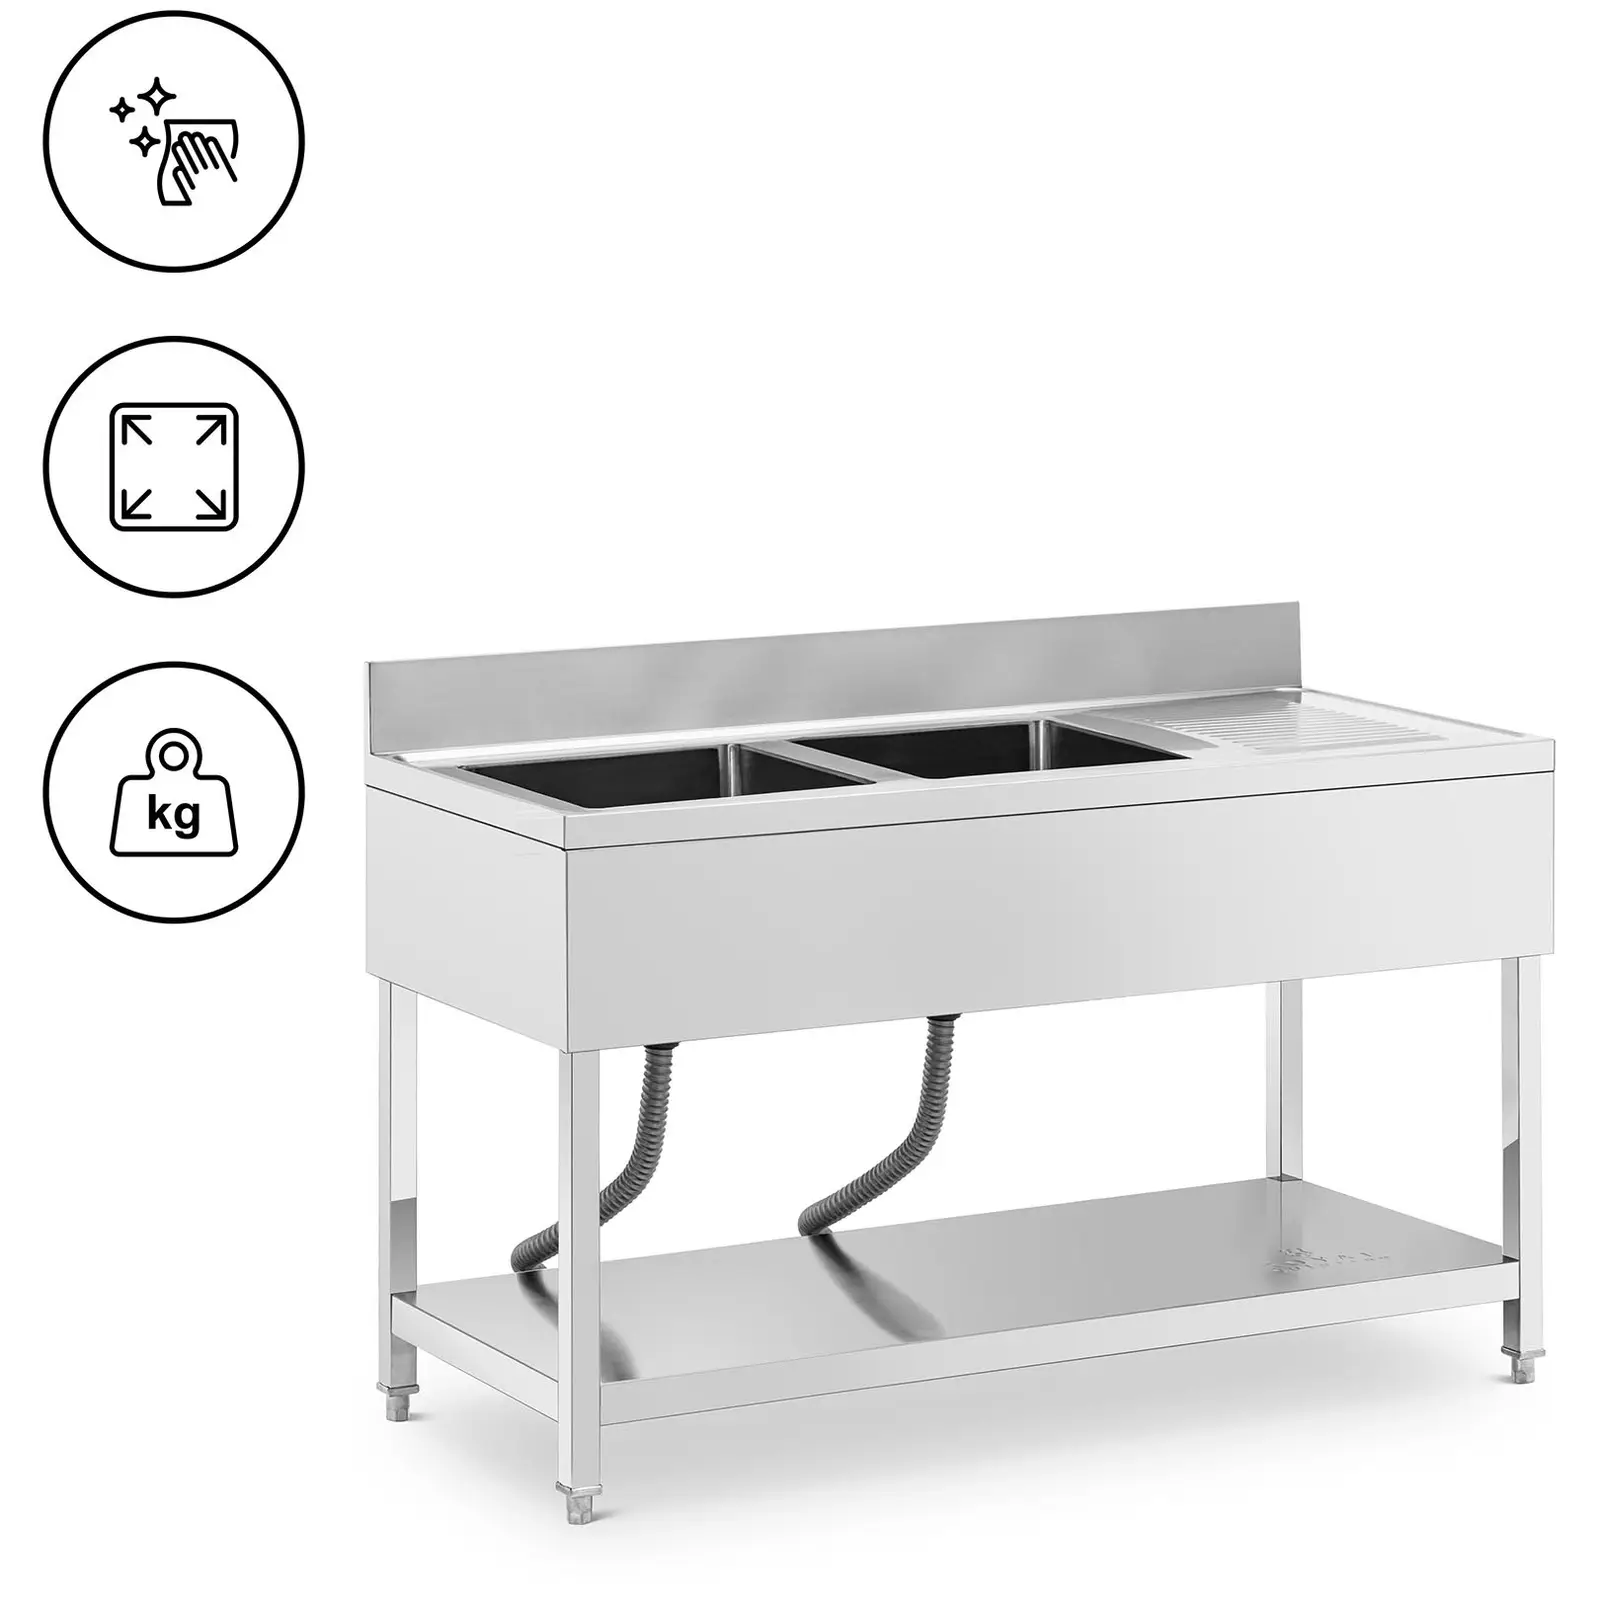 Sink Unit - 2 basins - stainless steel - 140 x 60 x 97 cm - Royal Catering